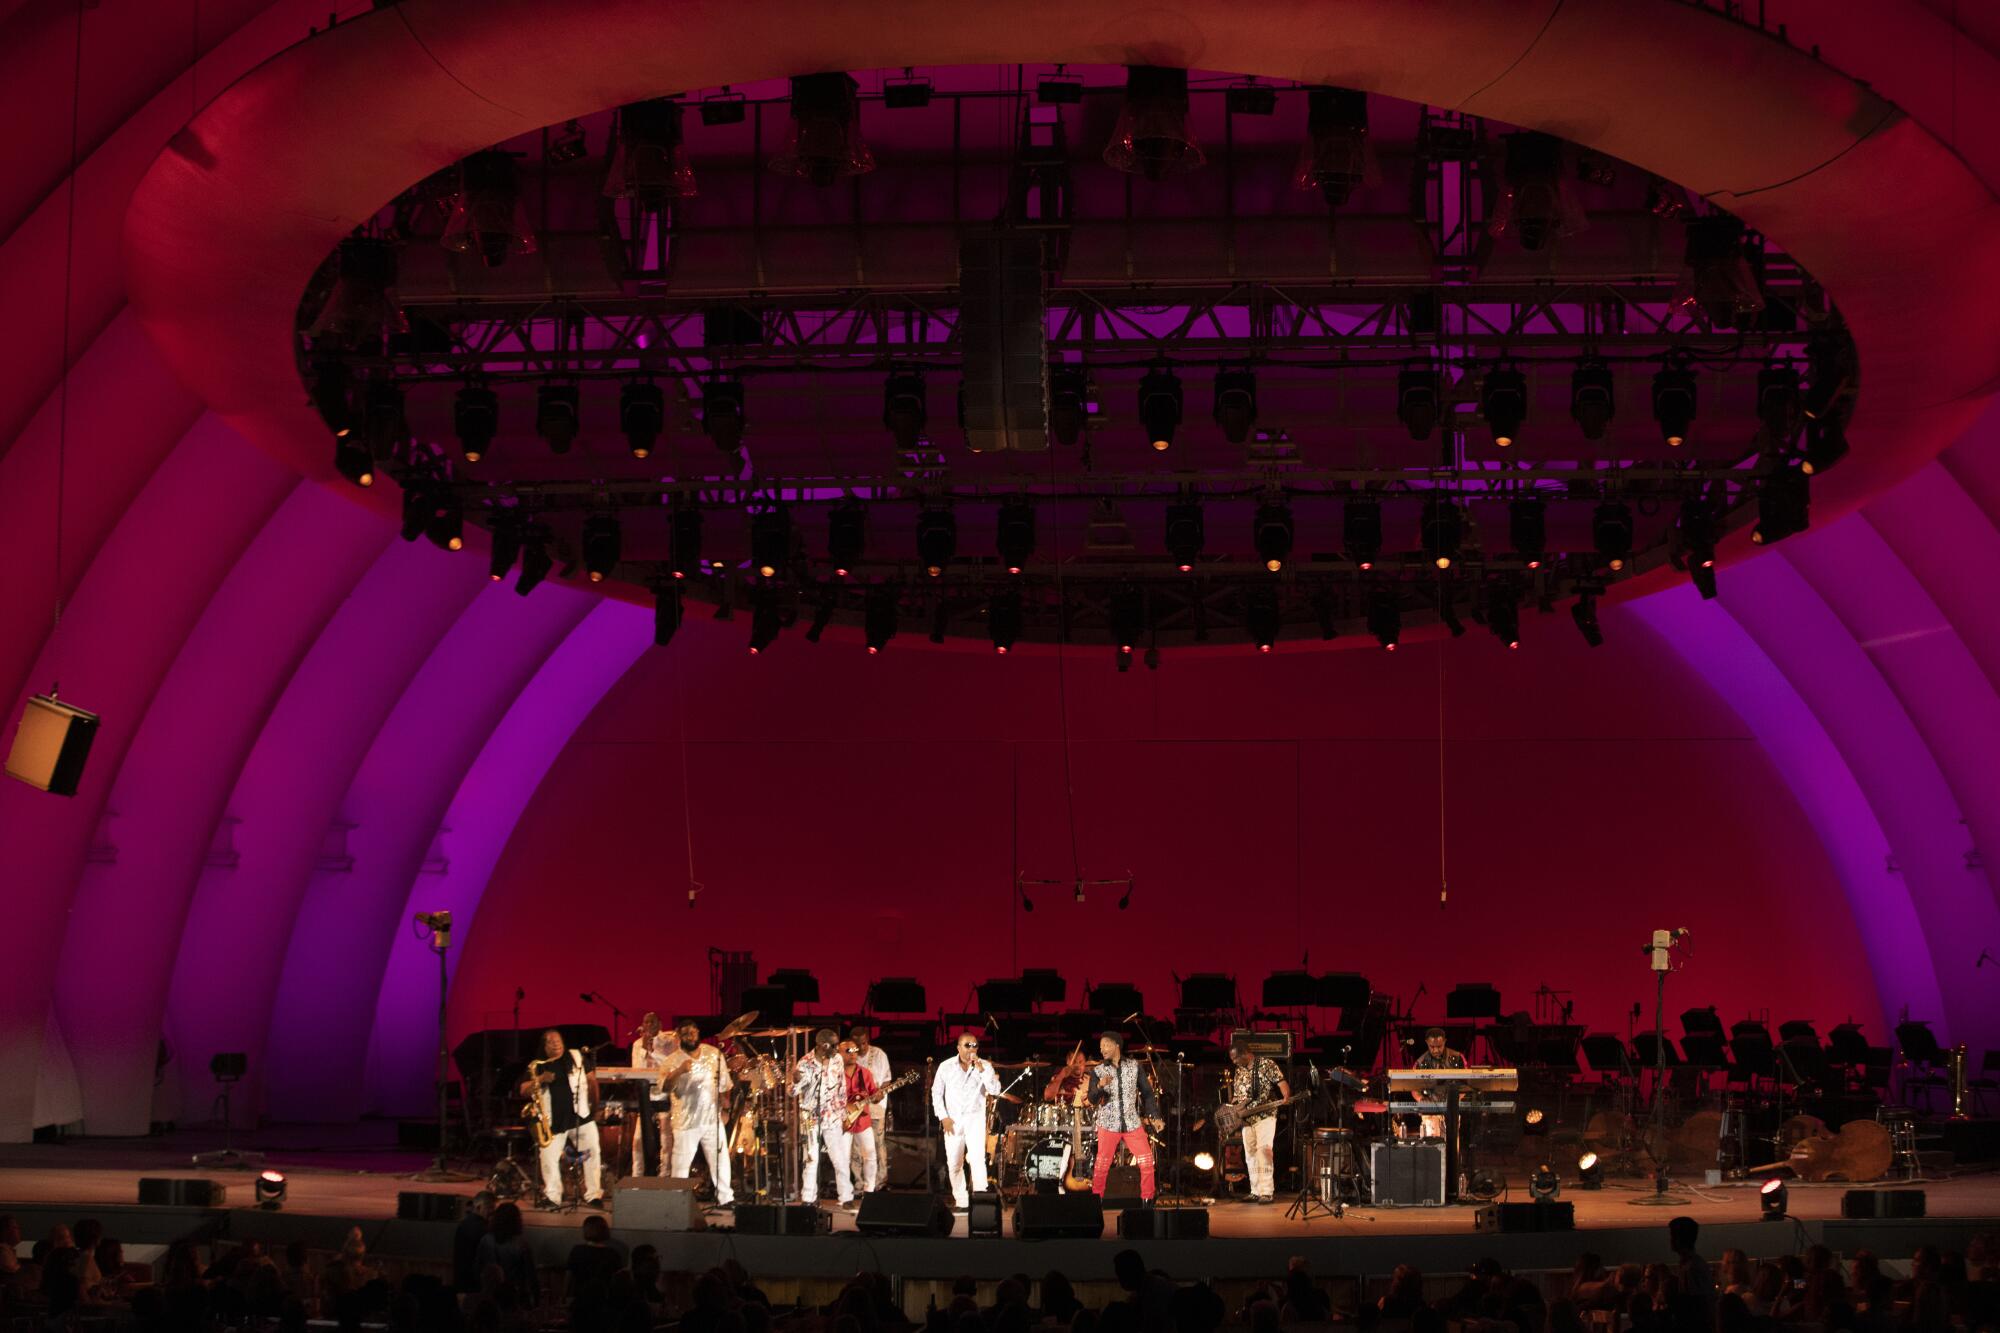 The Bowl stage, seen from a distance, glows purple and red as a band performs.